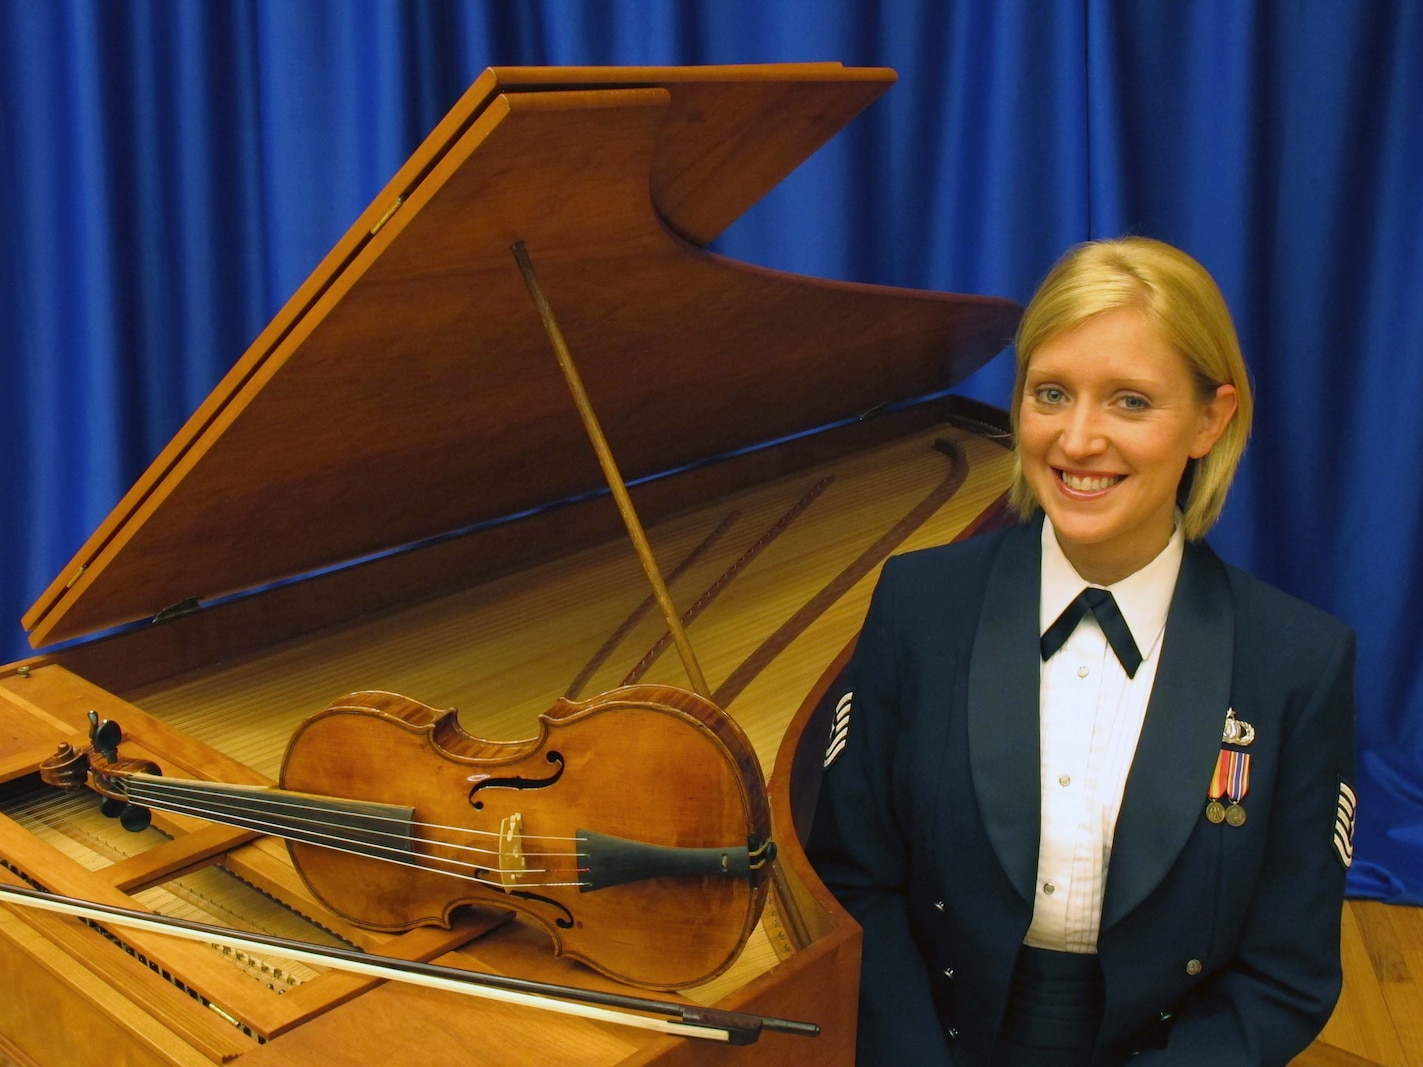 Soprano, Technical Sgt. Mandi Harper will perform a recital of music by J.S. Bach with Baroque violinist, Senior Master Sgt. Bill Tortolano and harpsichordist, Master Sgt. Steve Erickson on Sep. 23 at 3 p.m. in Alexandria, Va. (Air Force photo by Chief Master Sgt. Jan Duga)